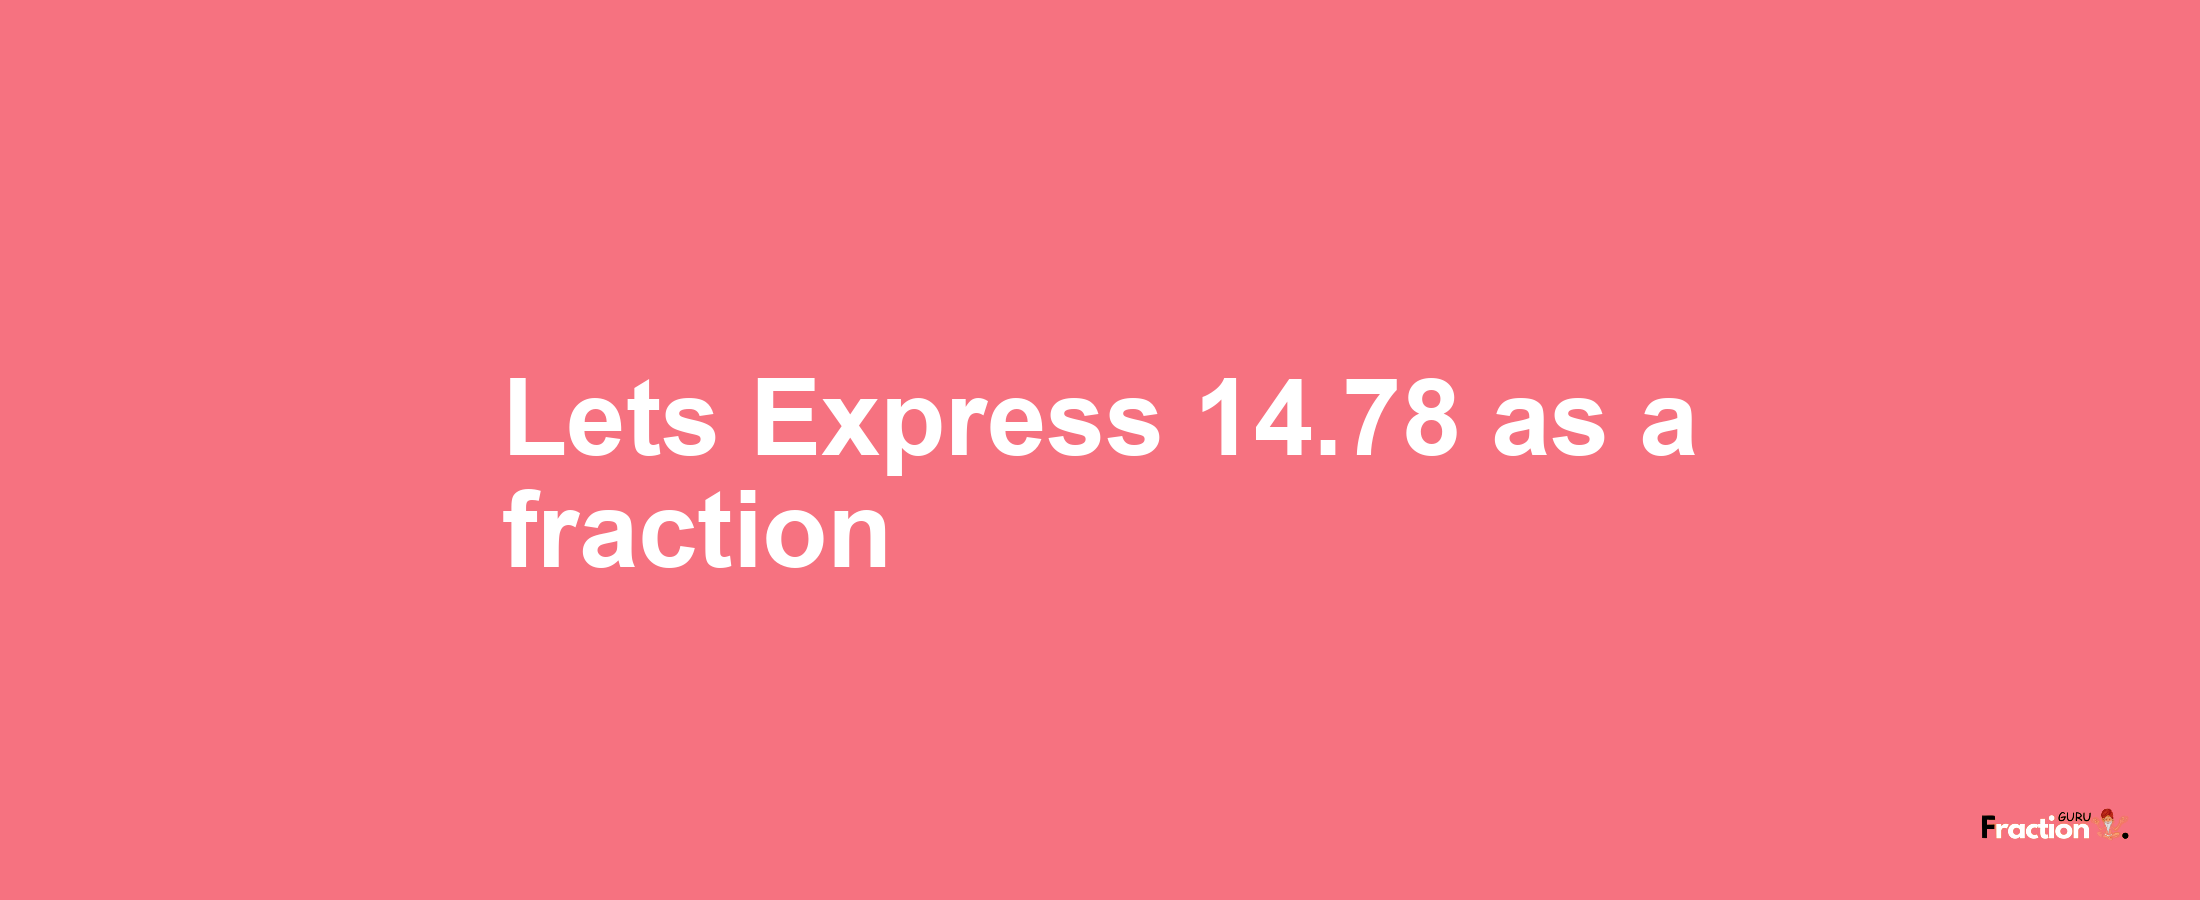 Lets Express 14.78 as afraction